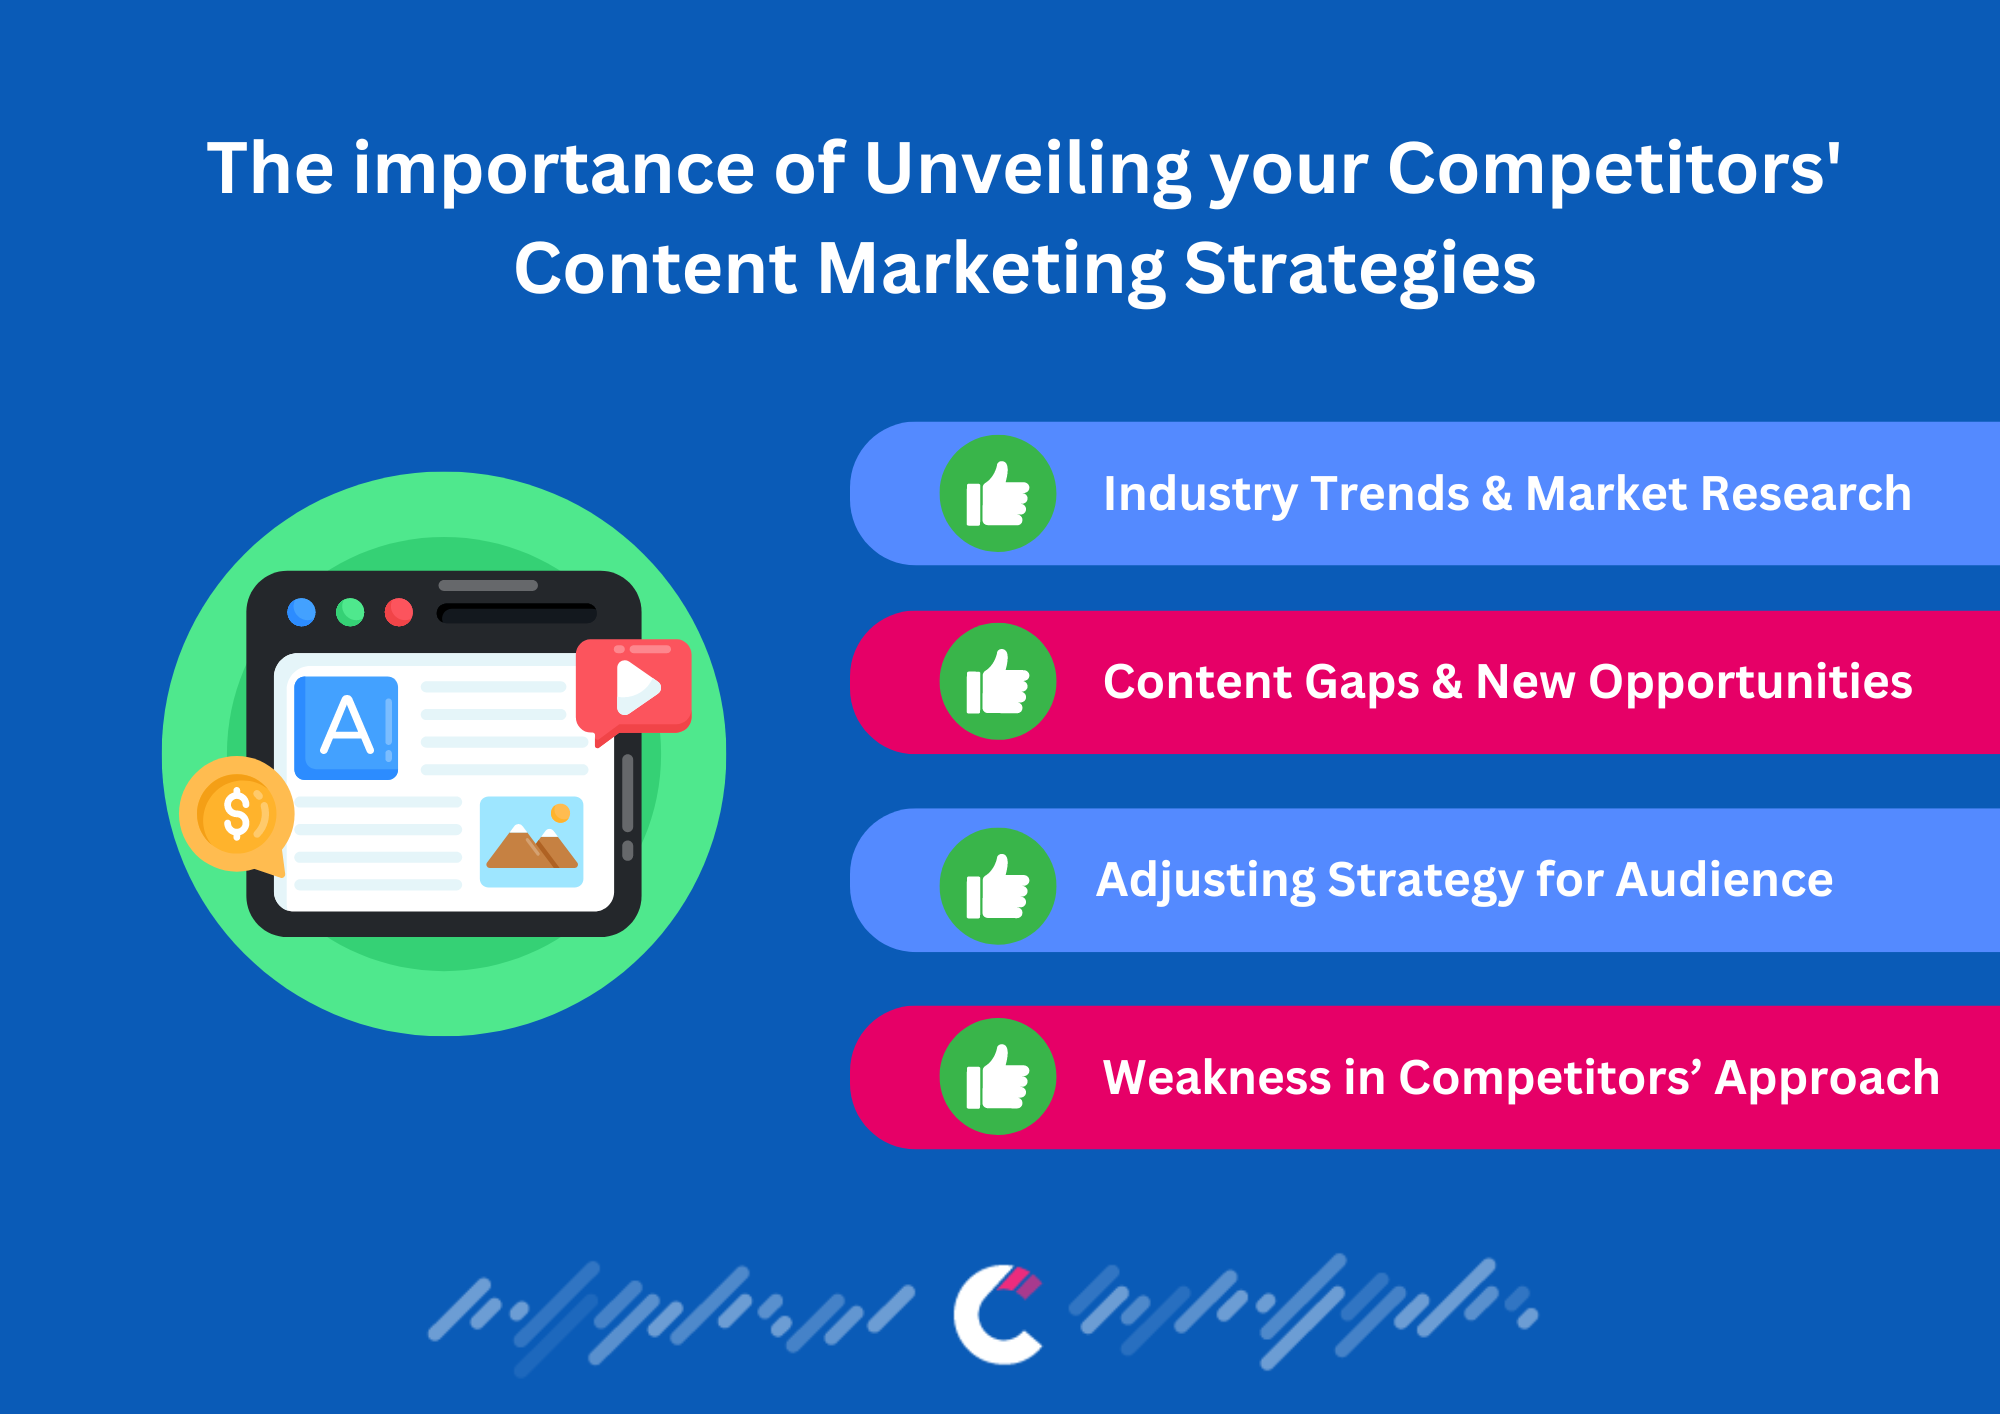 The importance of Unveiling your Competitors' Content Marketing Strategies